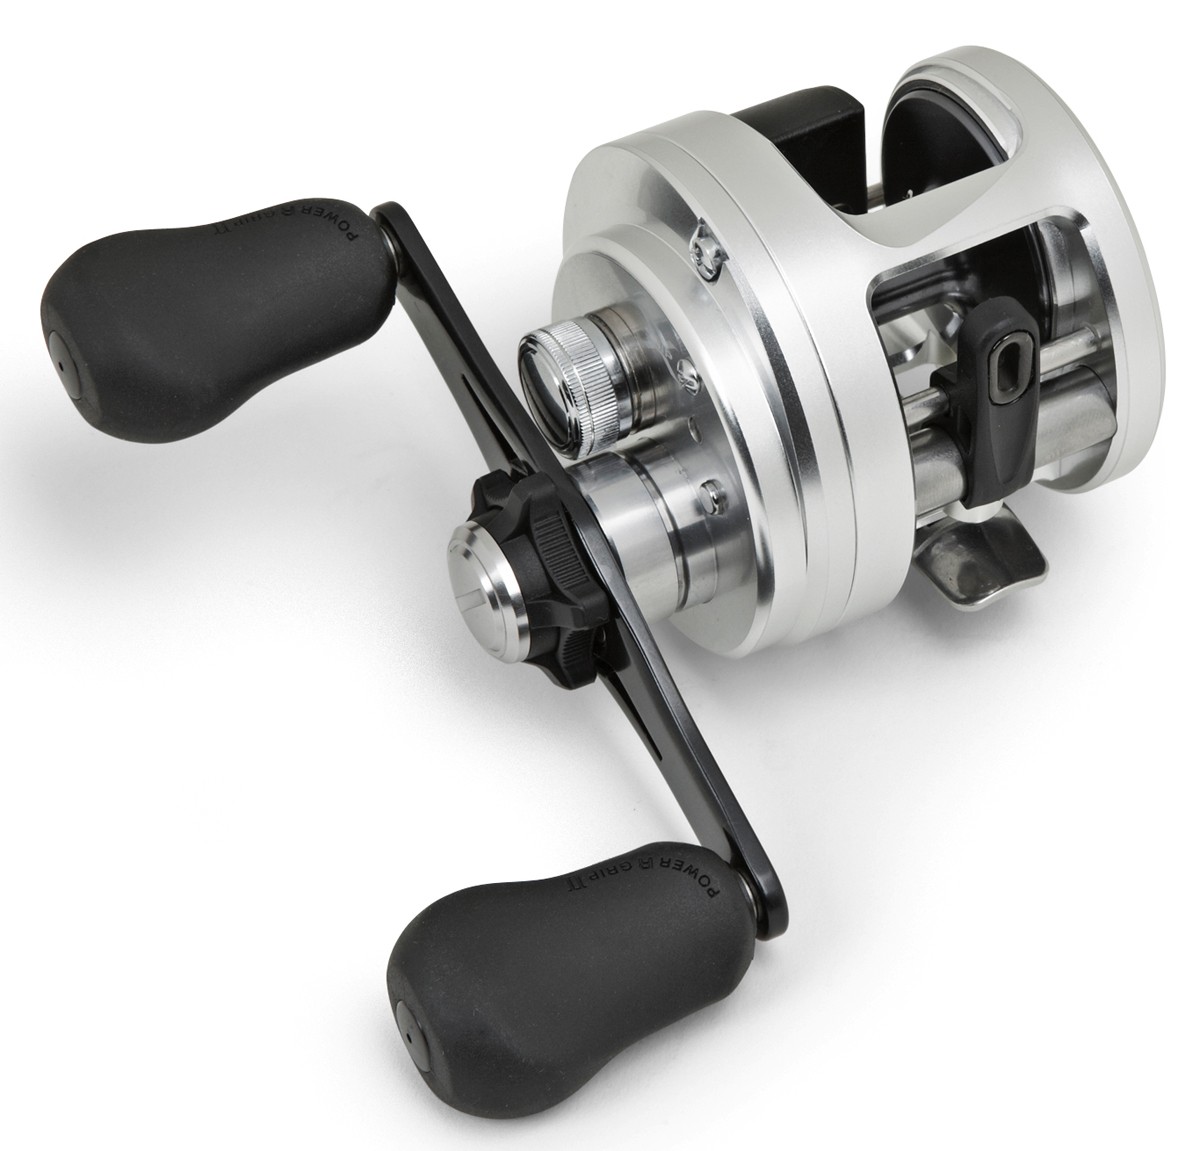 Shimano reel for deep cranking - Fishing Rods, Reels, Line, and